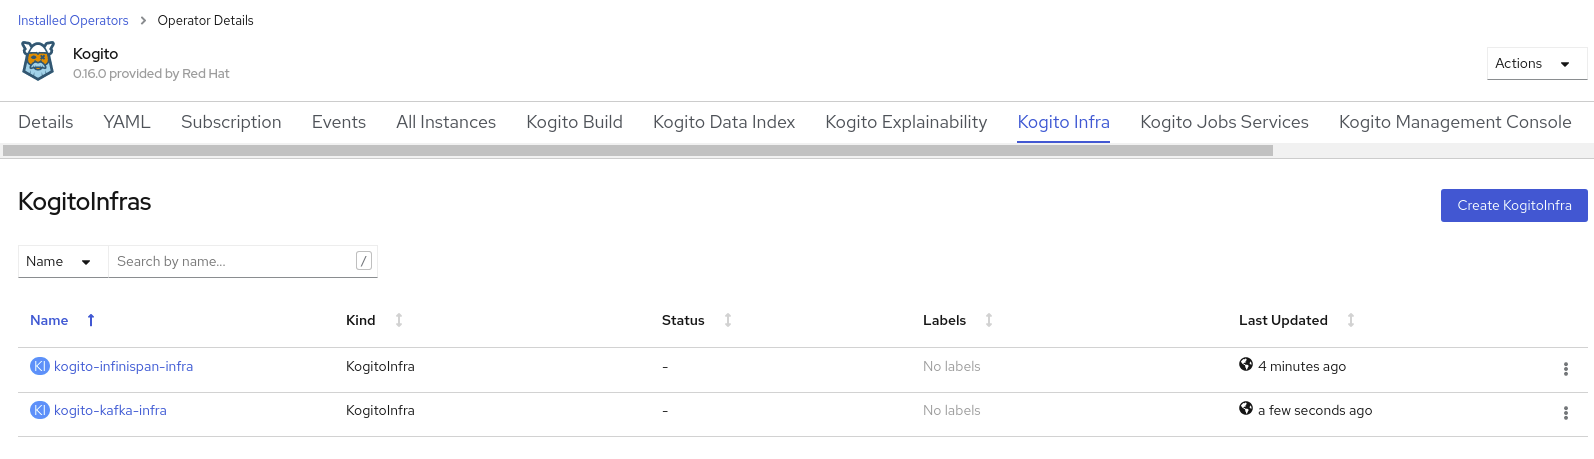 Image of Kogito infra details in web console